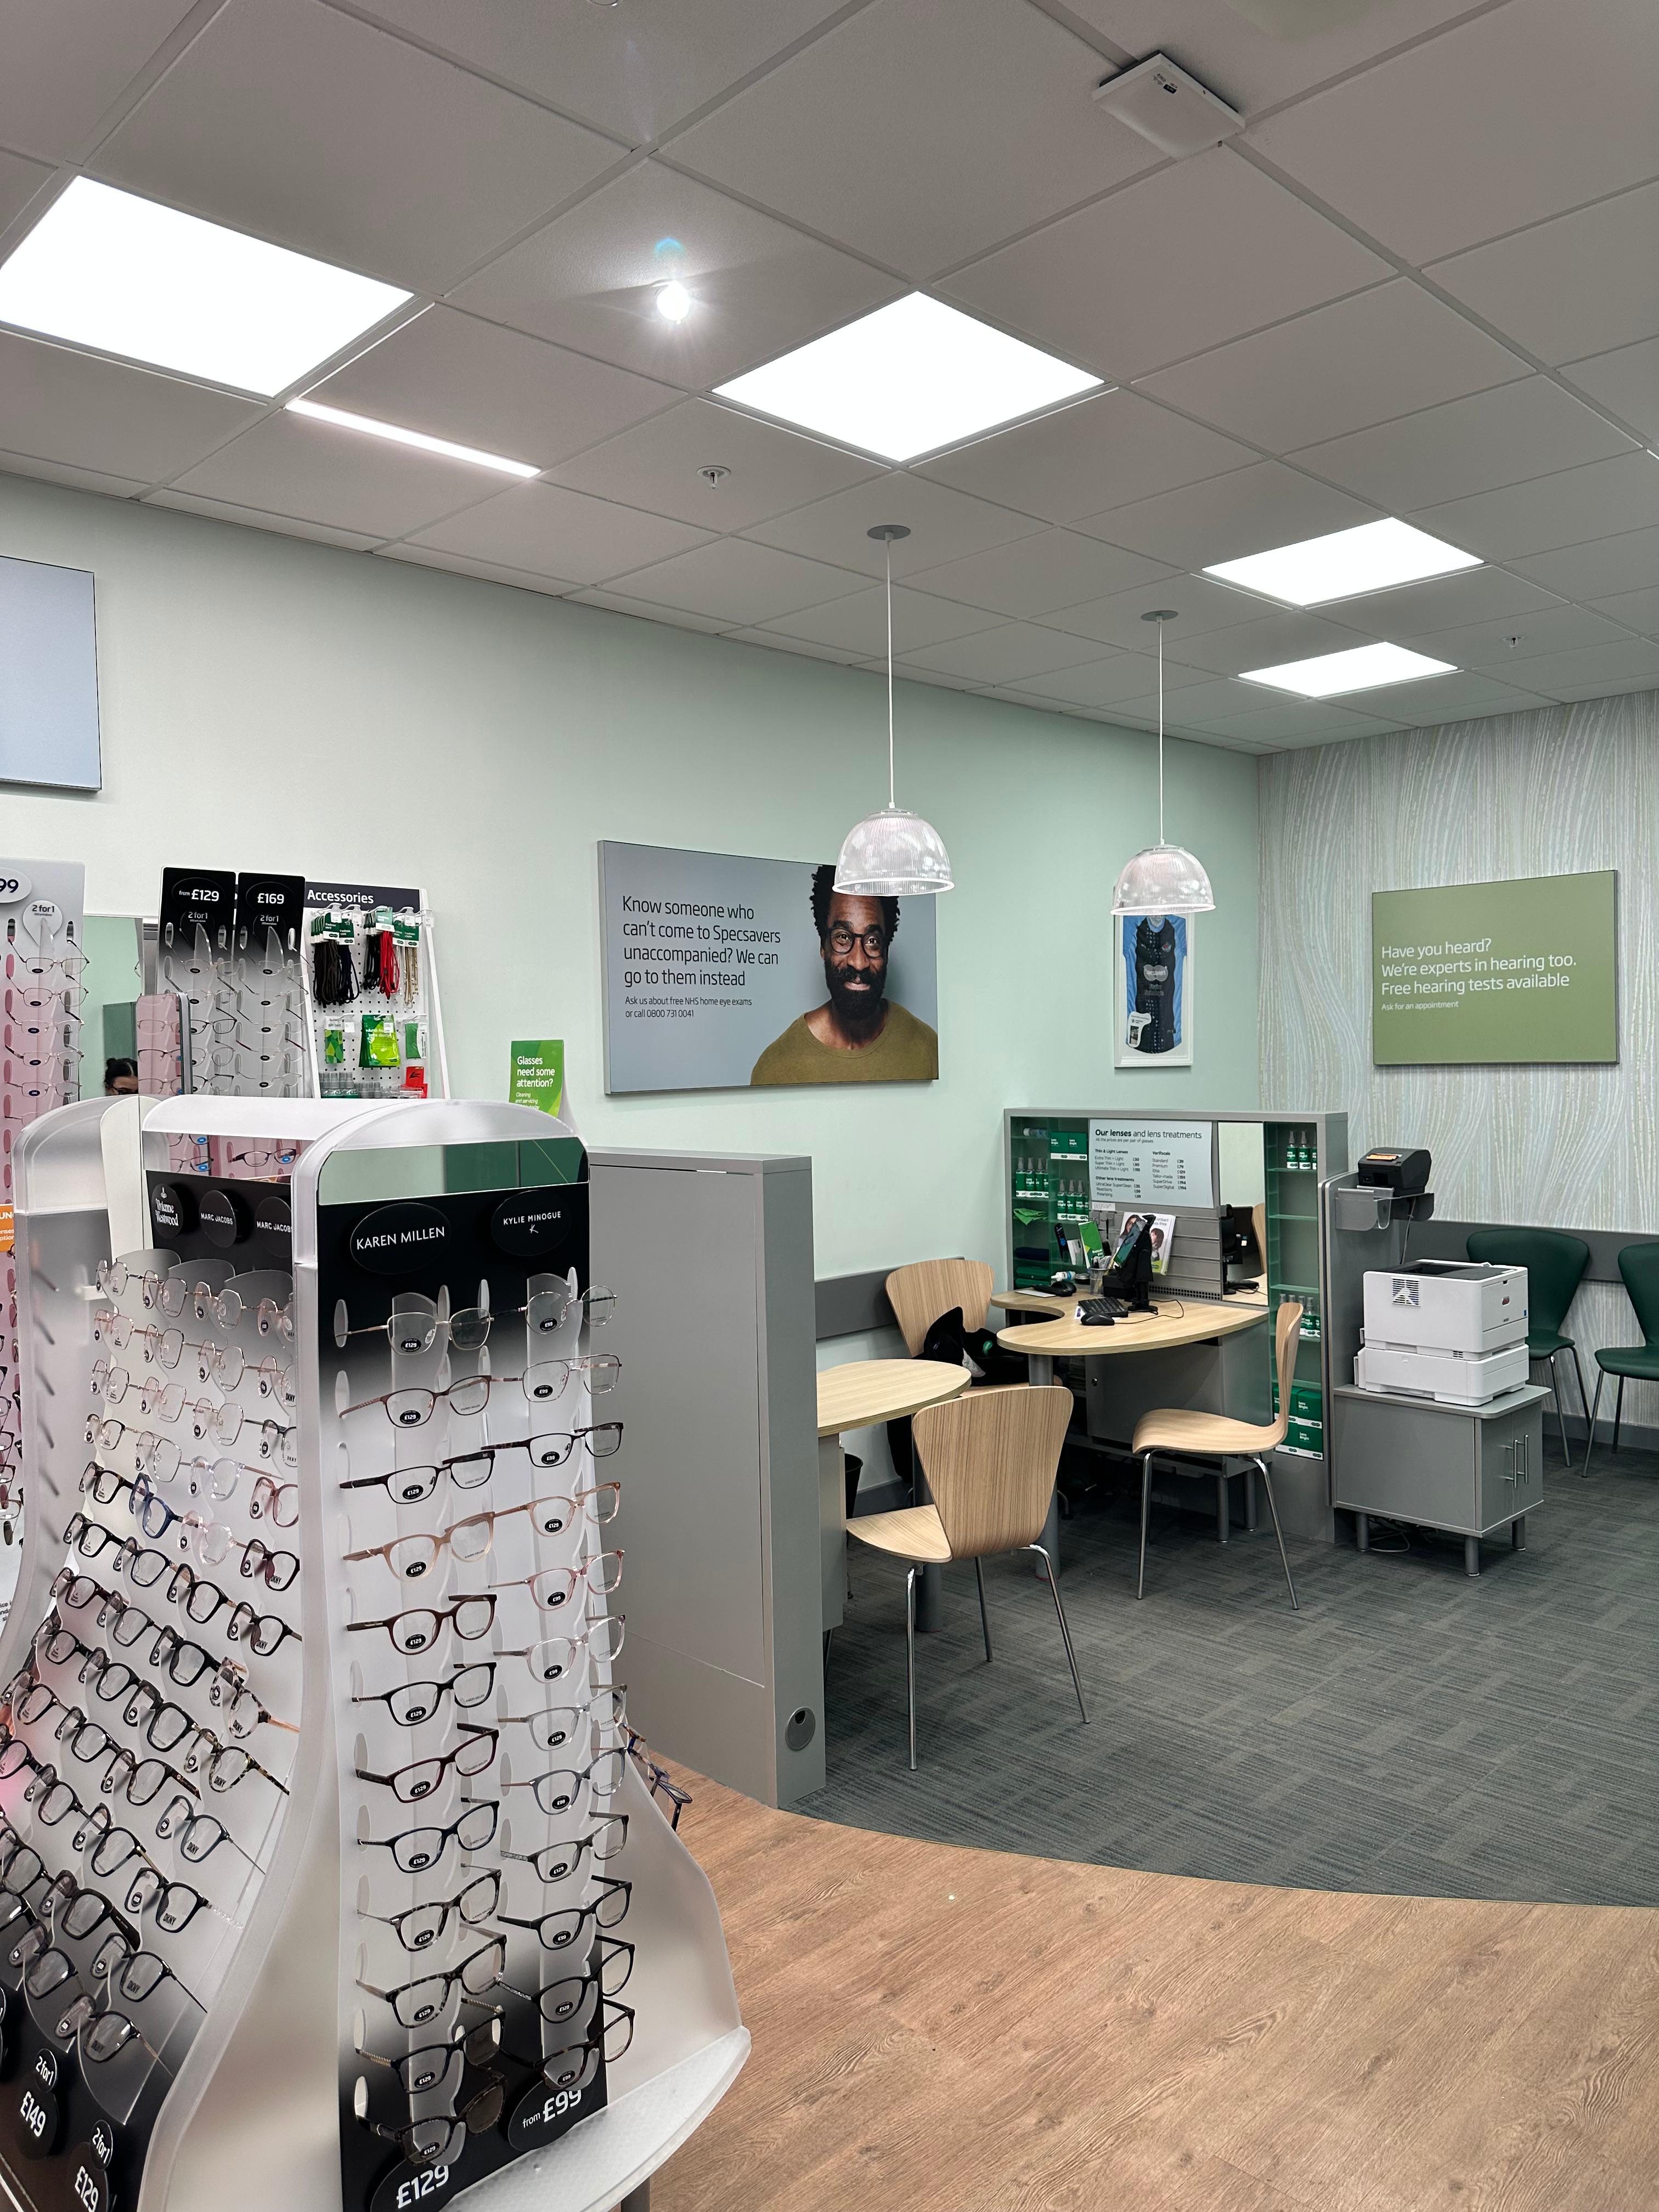 Images Specsavers Opticians and Audiologists - Straiton Sainsbury's